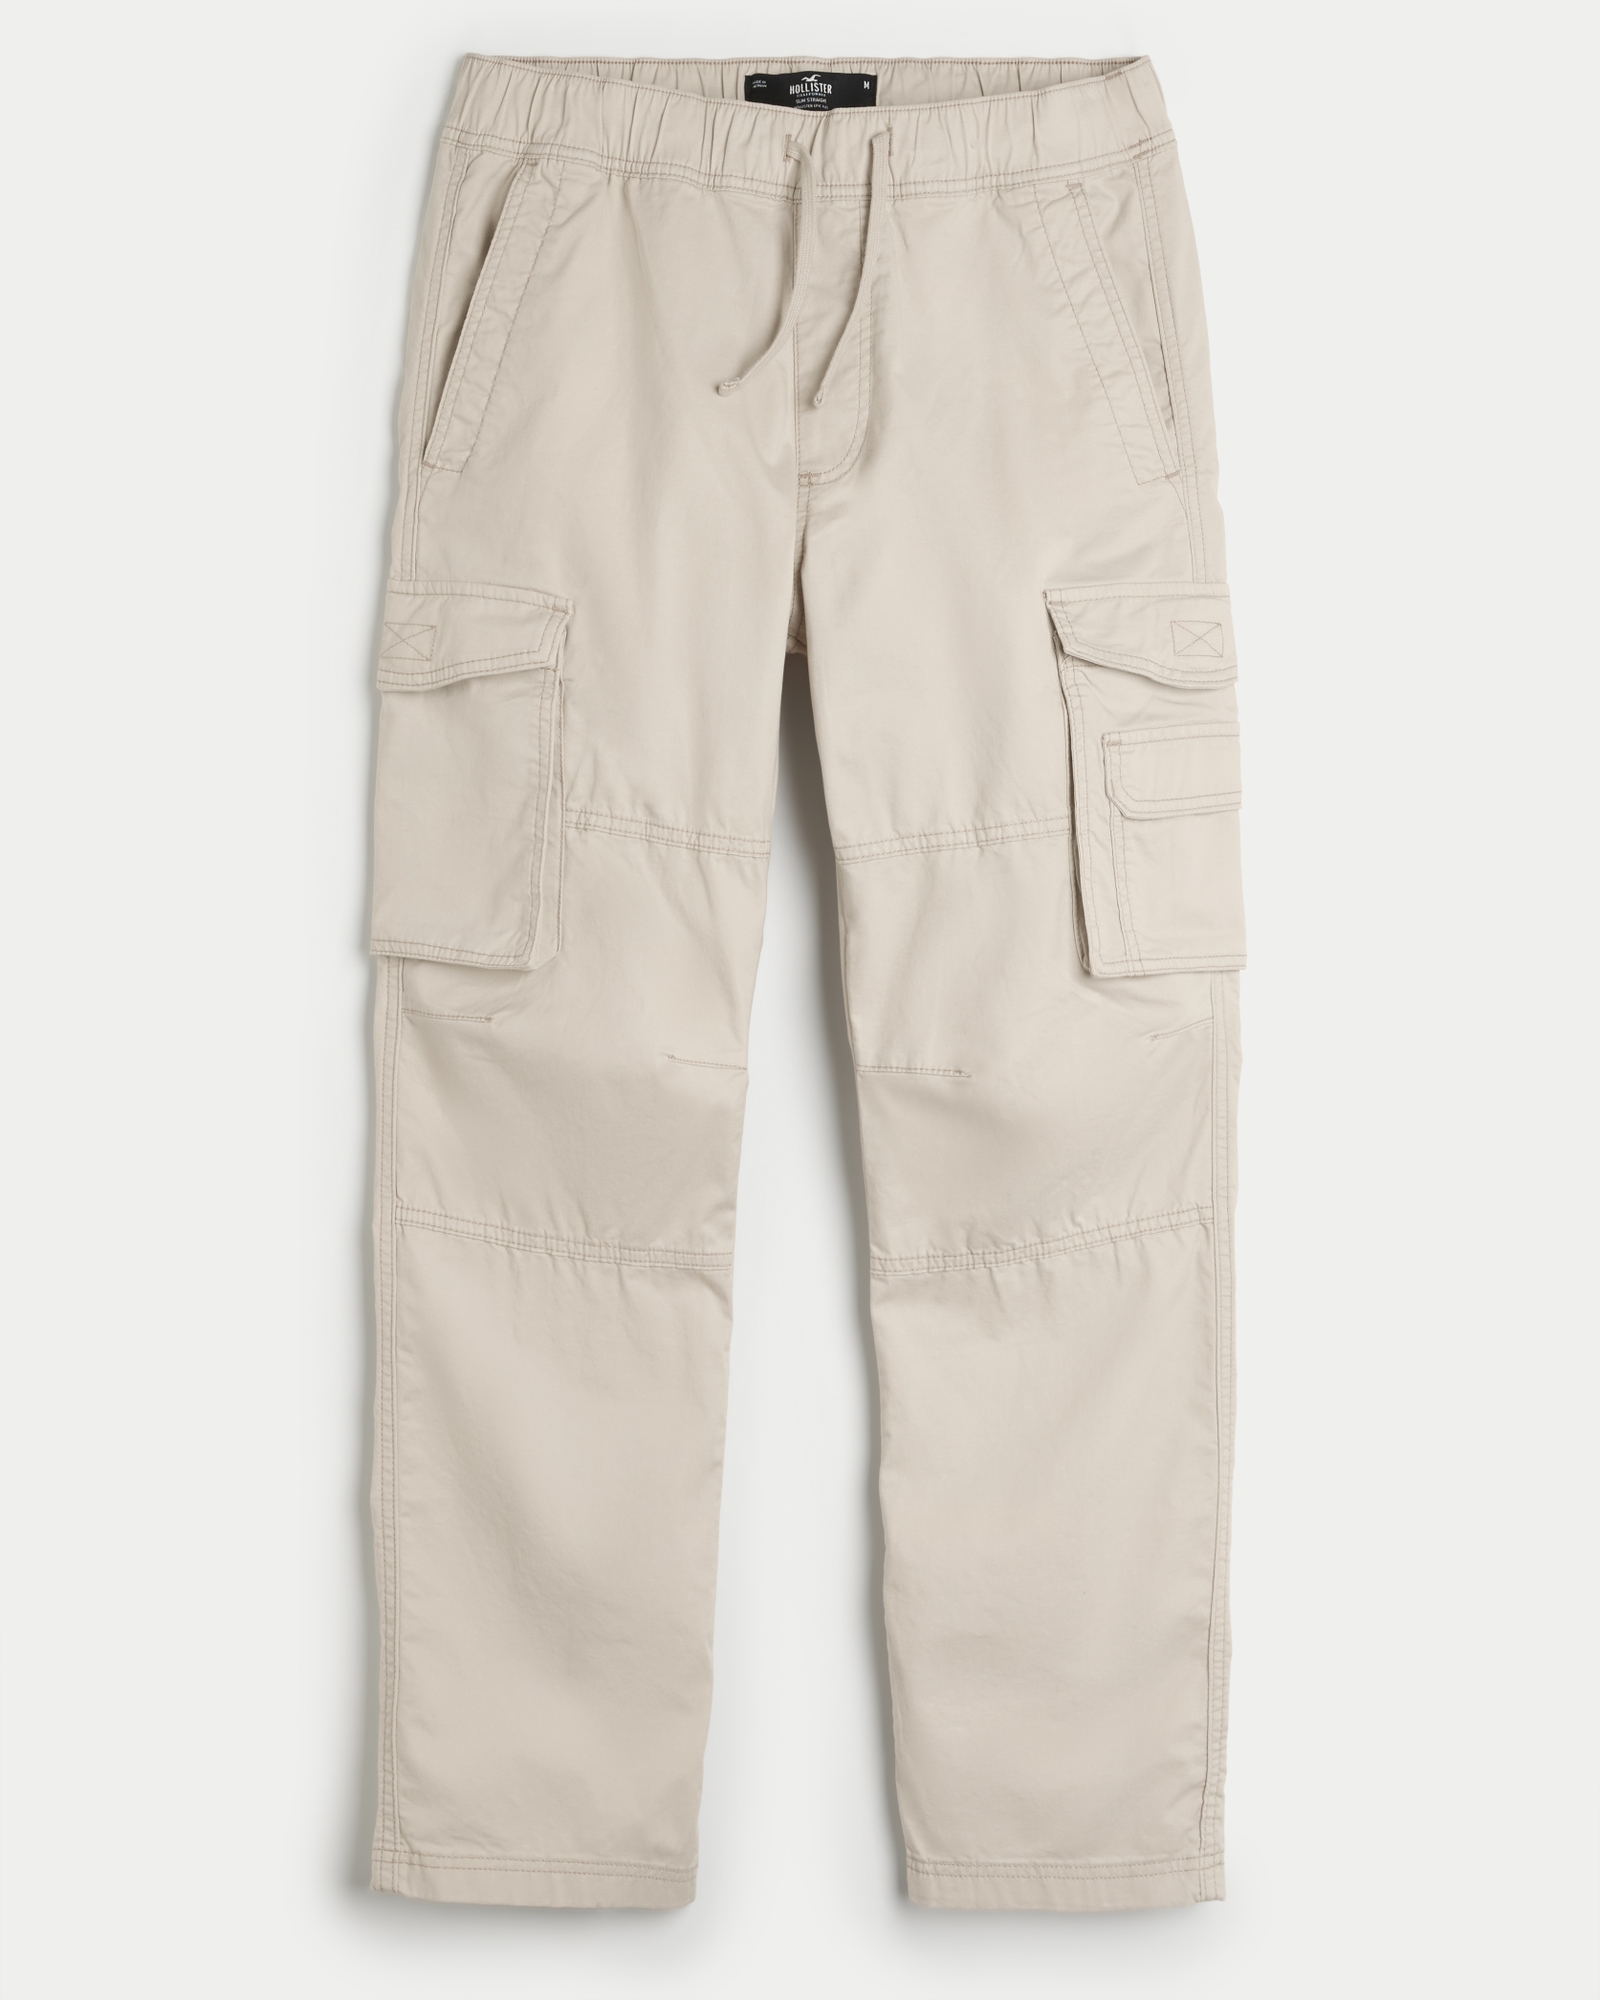 https://img.hollisterco.com/is/image/anf/KIC_330-3107-0023-178_prod1.jpg?policy=product-extra-large